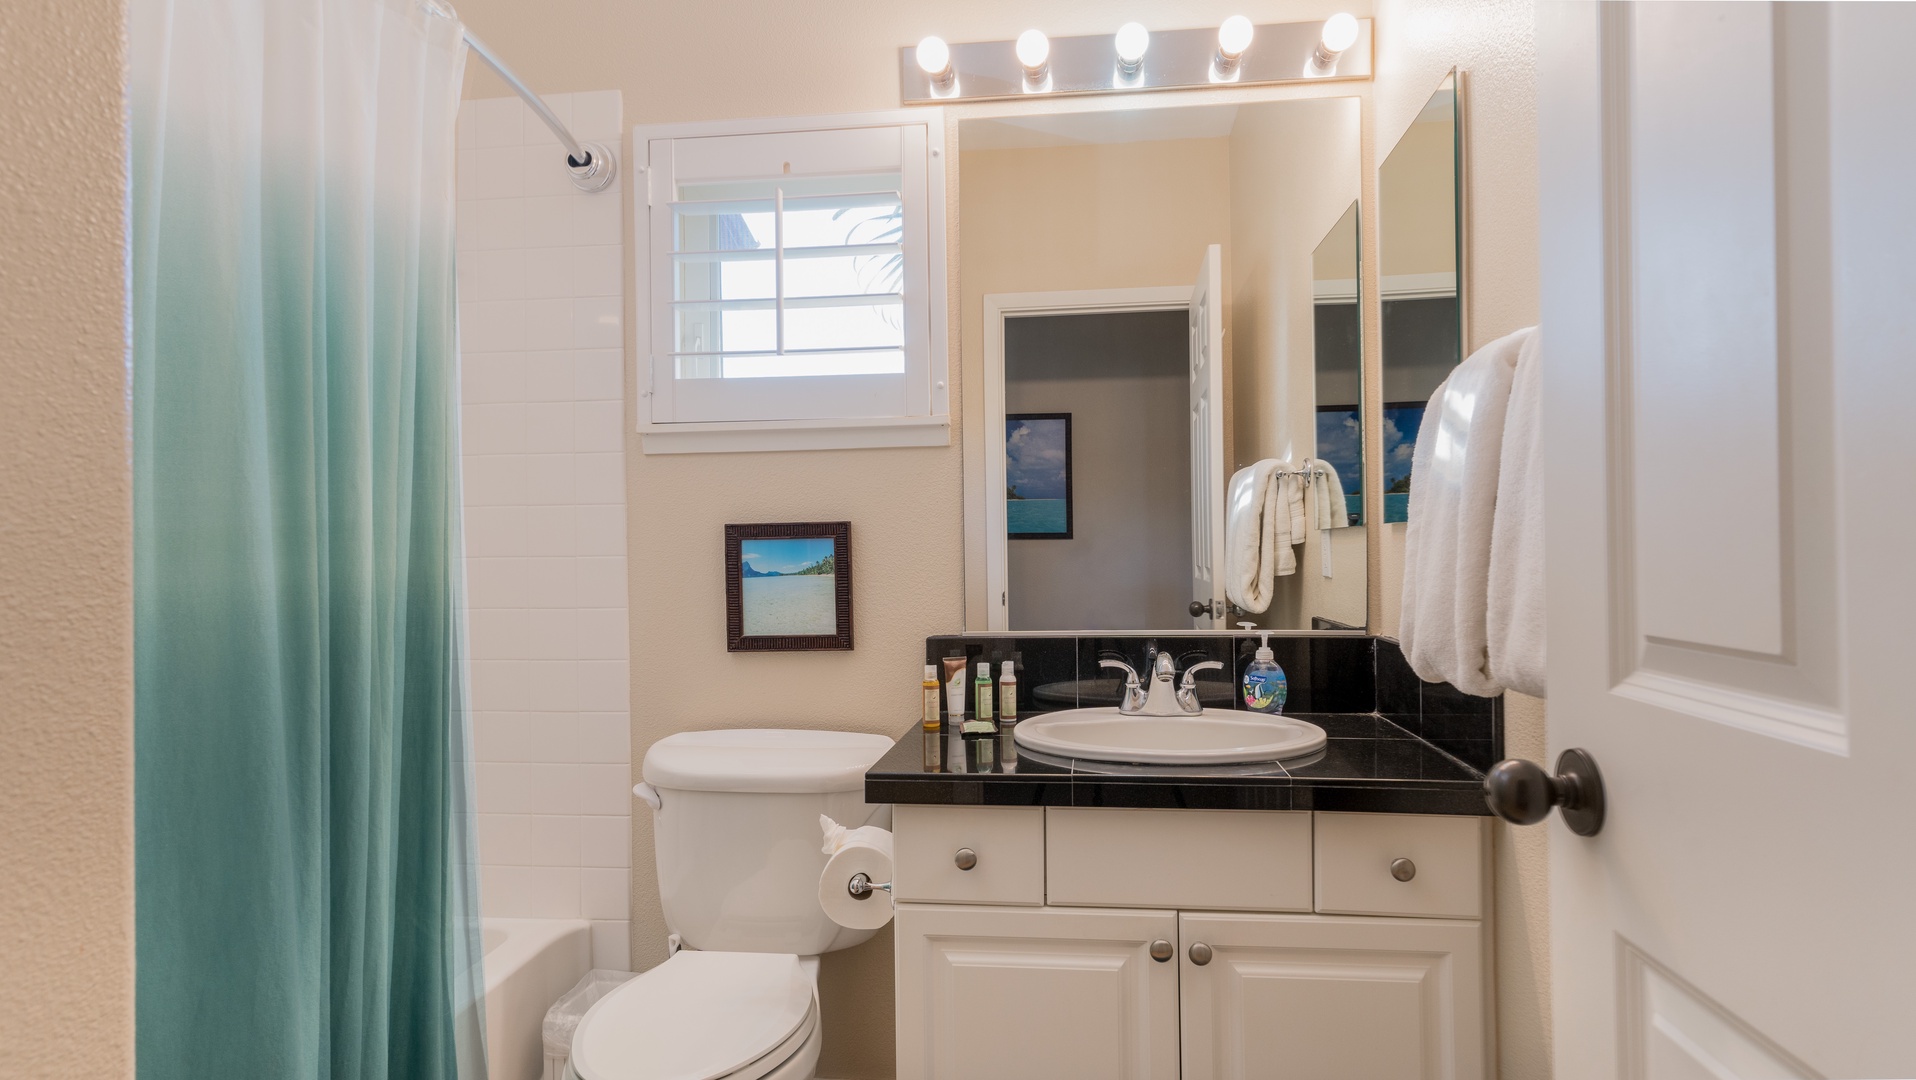 Kapolei Vacation Rentals, Coconut Plantation 1194-3 - The second guest bathroom vanity and natural lighting.